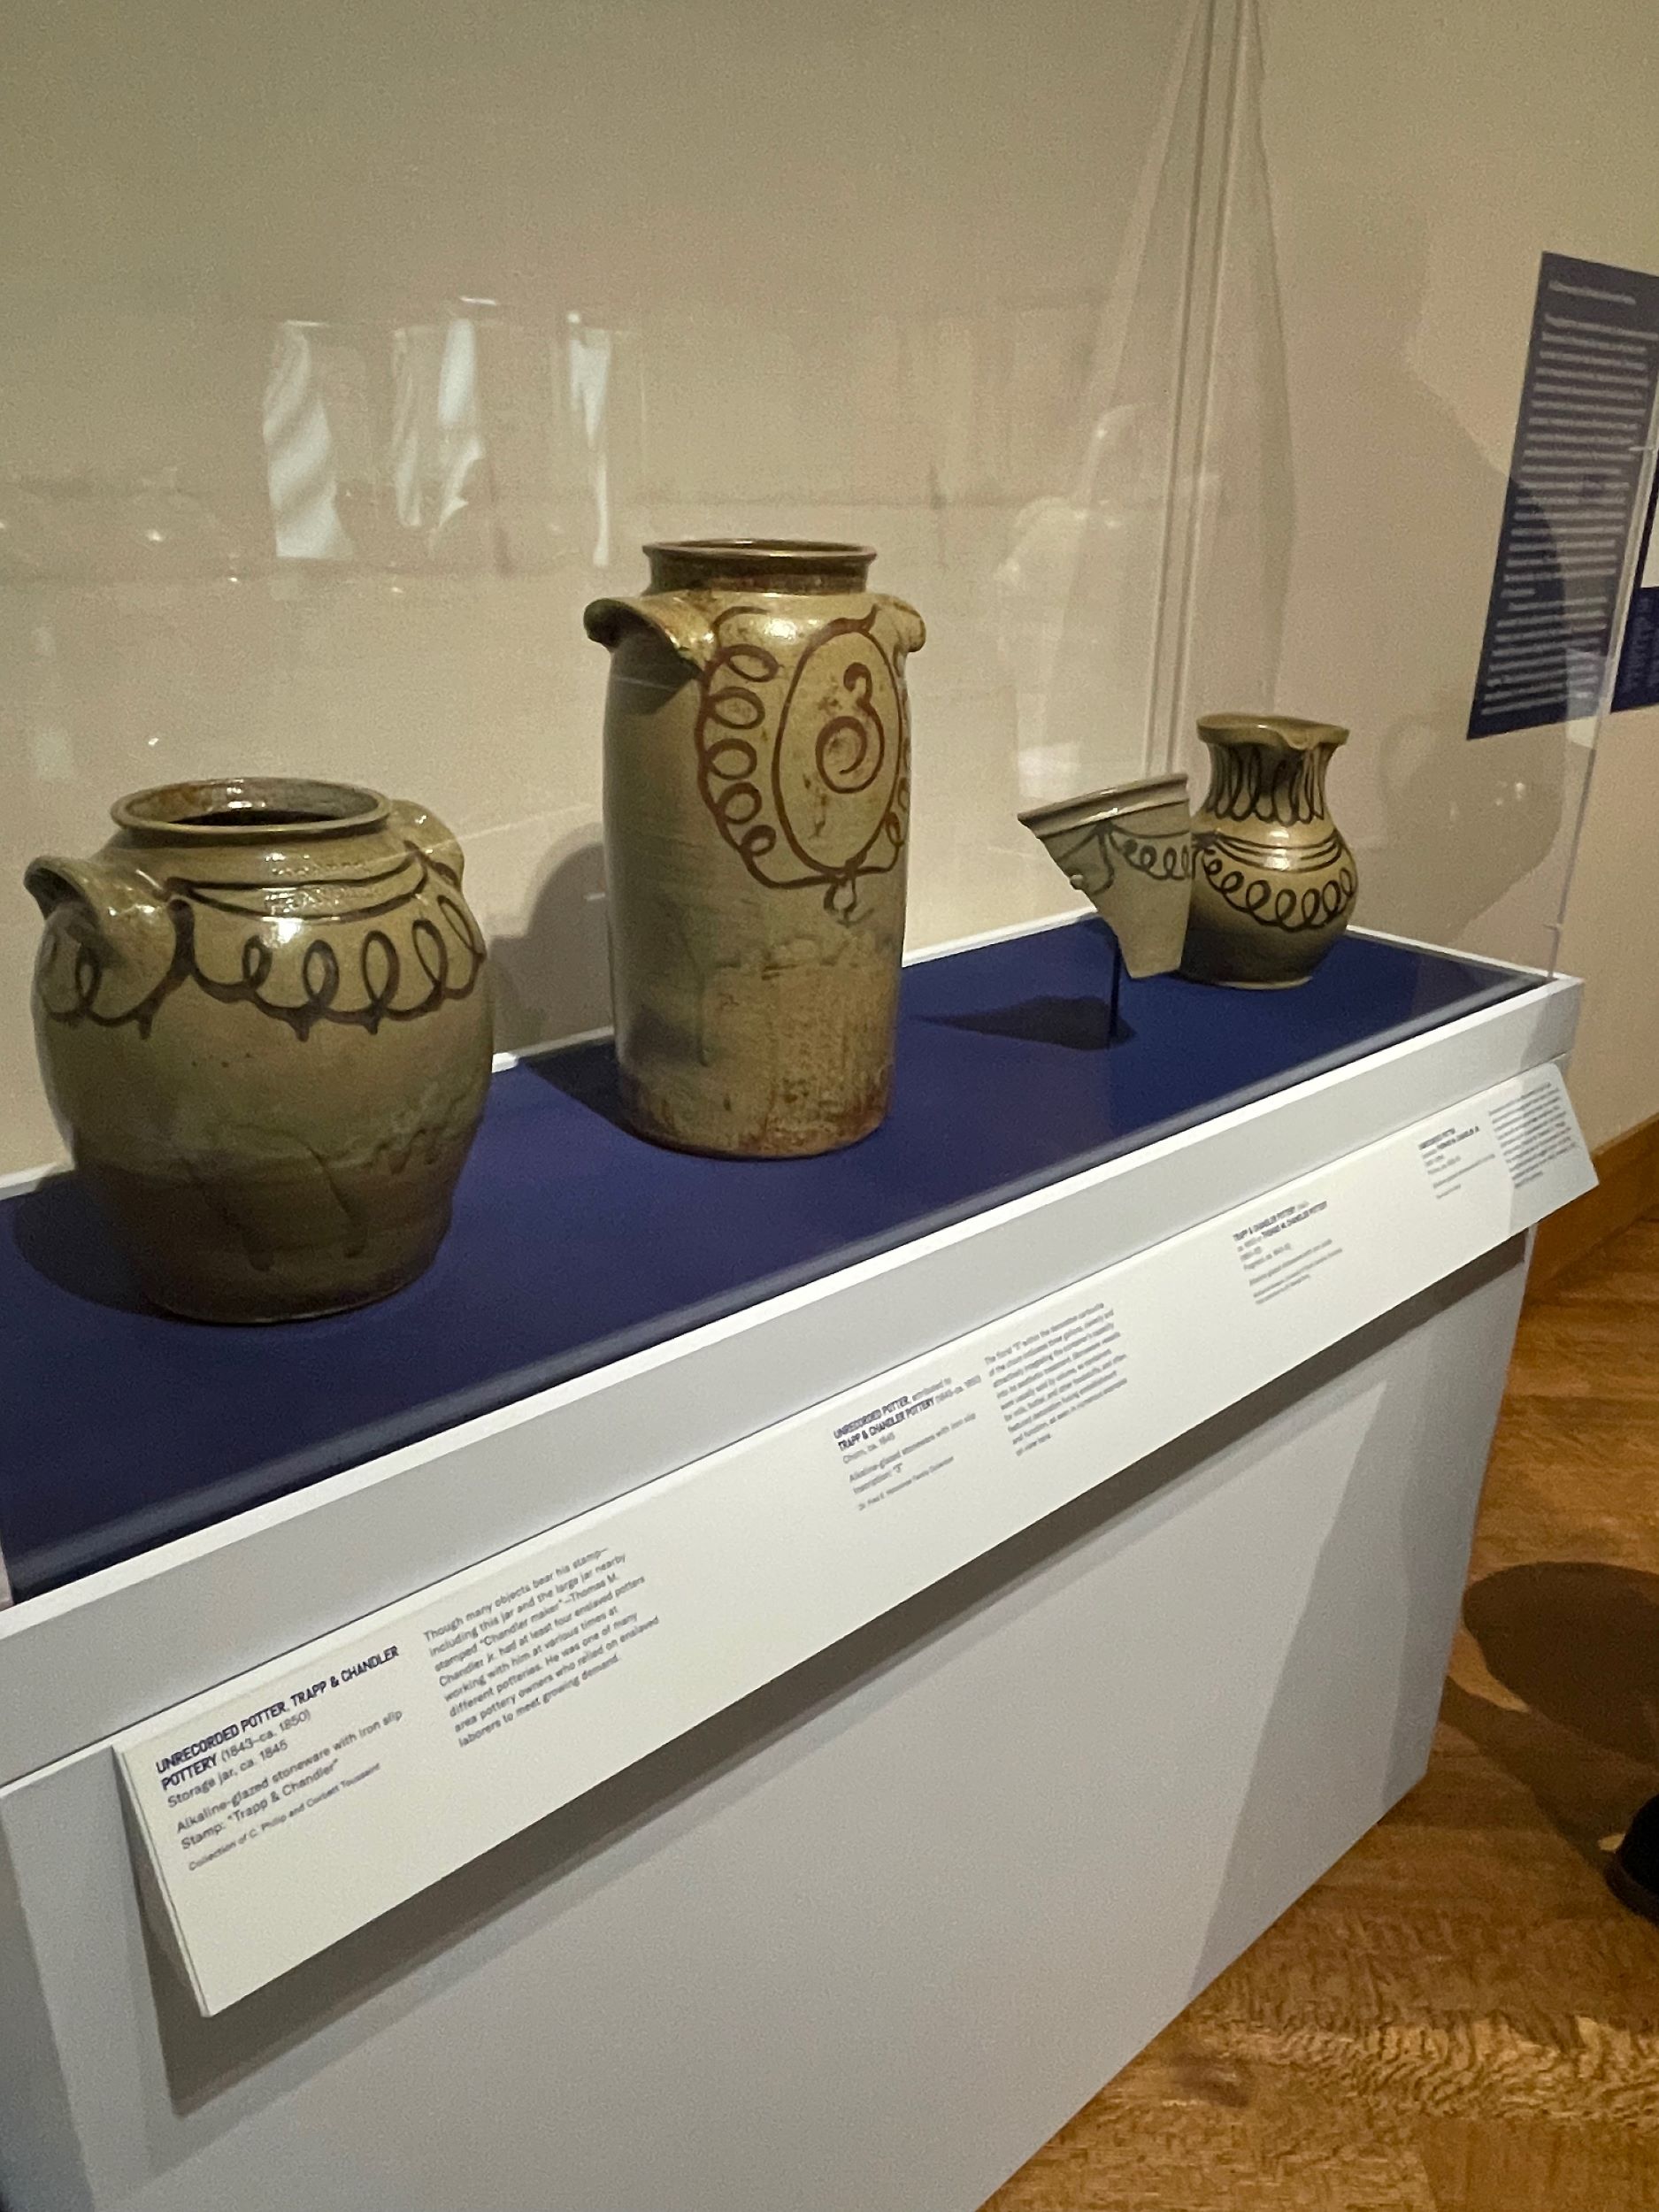 A glass-enclosed museum case featuring three ceramic vessels, with curlicued slip decorations, resting on a deep blue cloth. The case also includes a vessel fragment. 